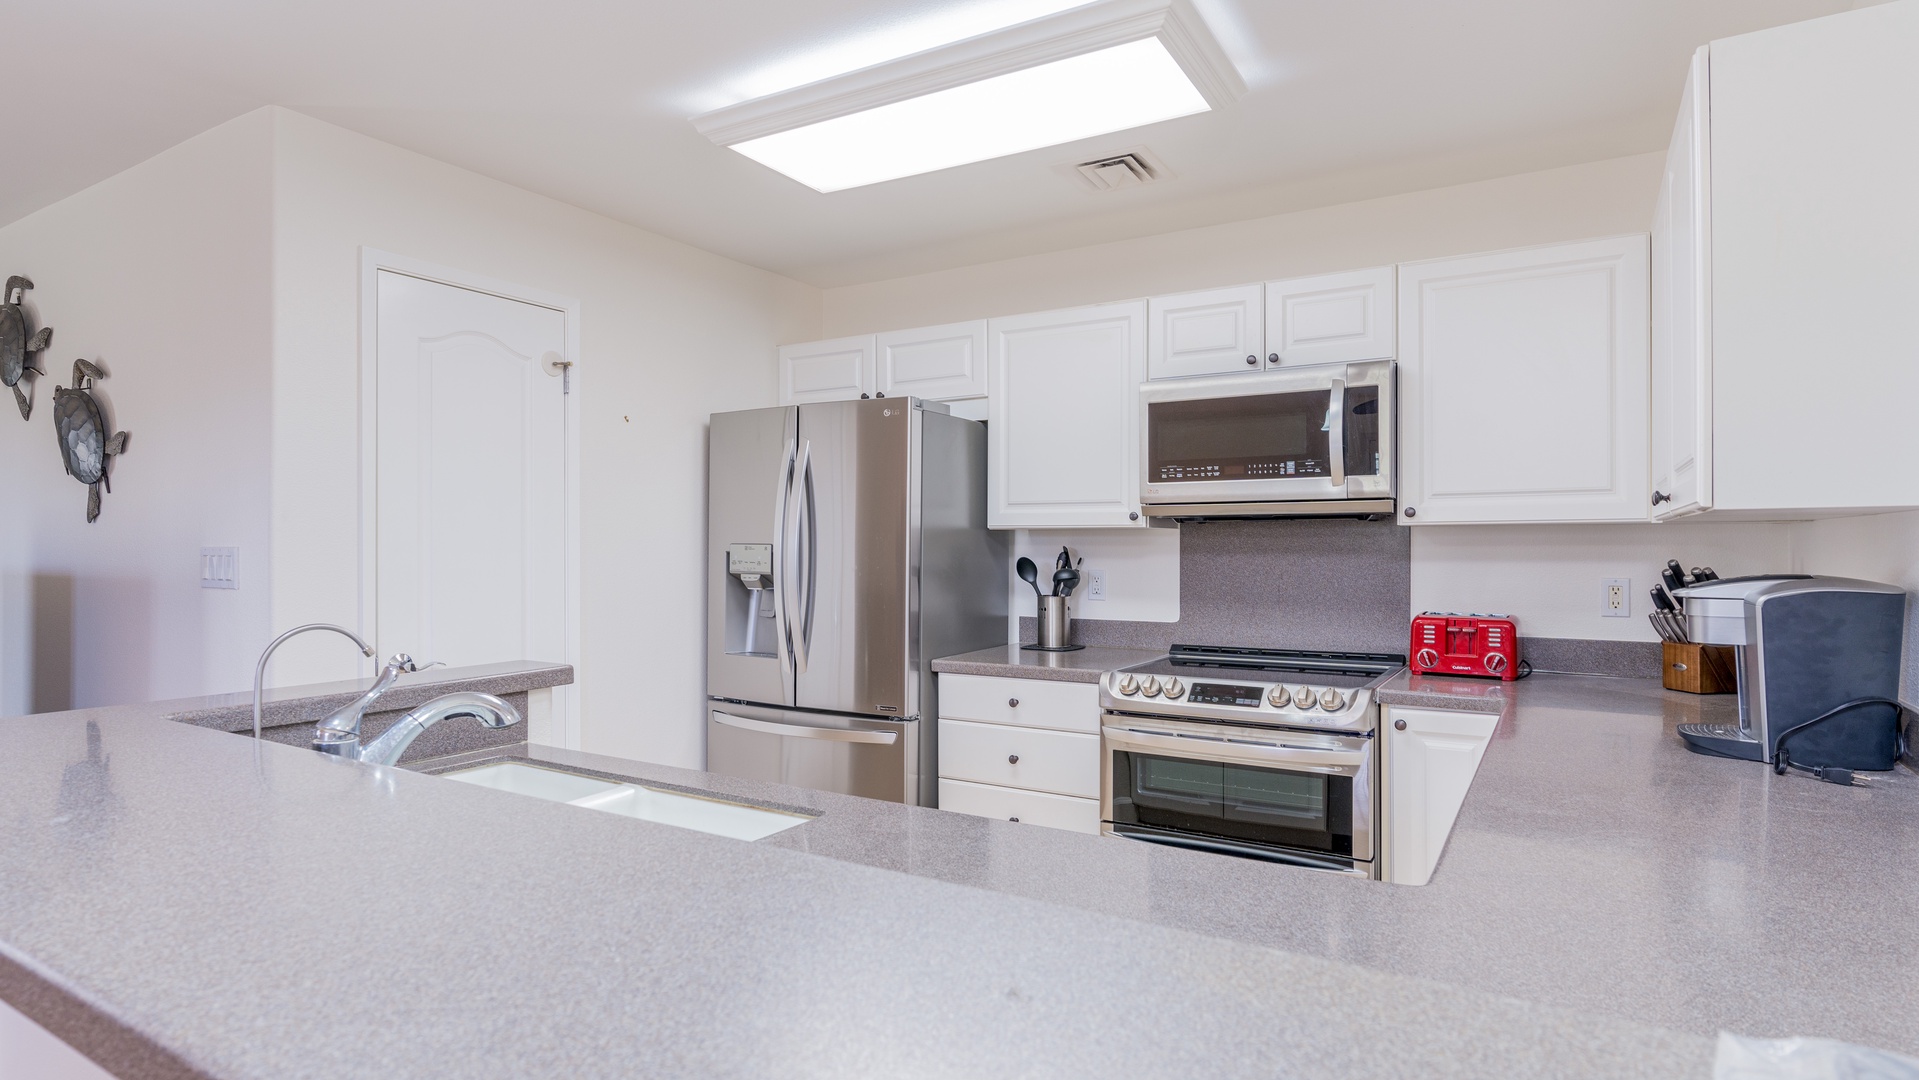 Kapolei Vacation Rentals, Ko Olina Kai 1057B - The kitchen's large counter top is ideal for hosting.